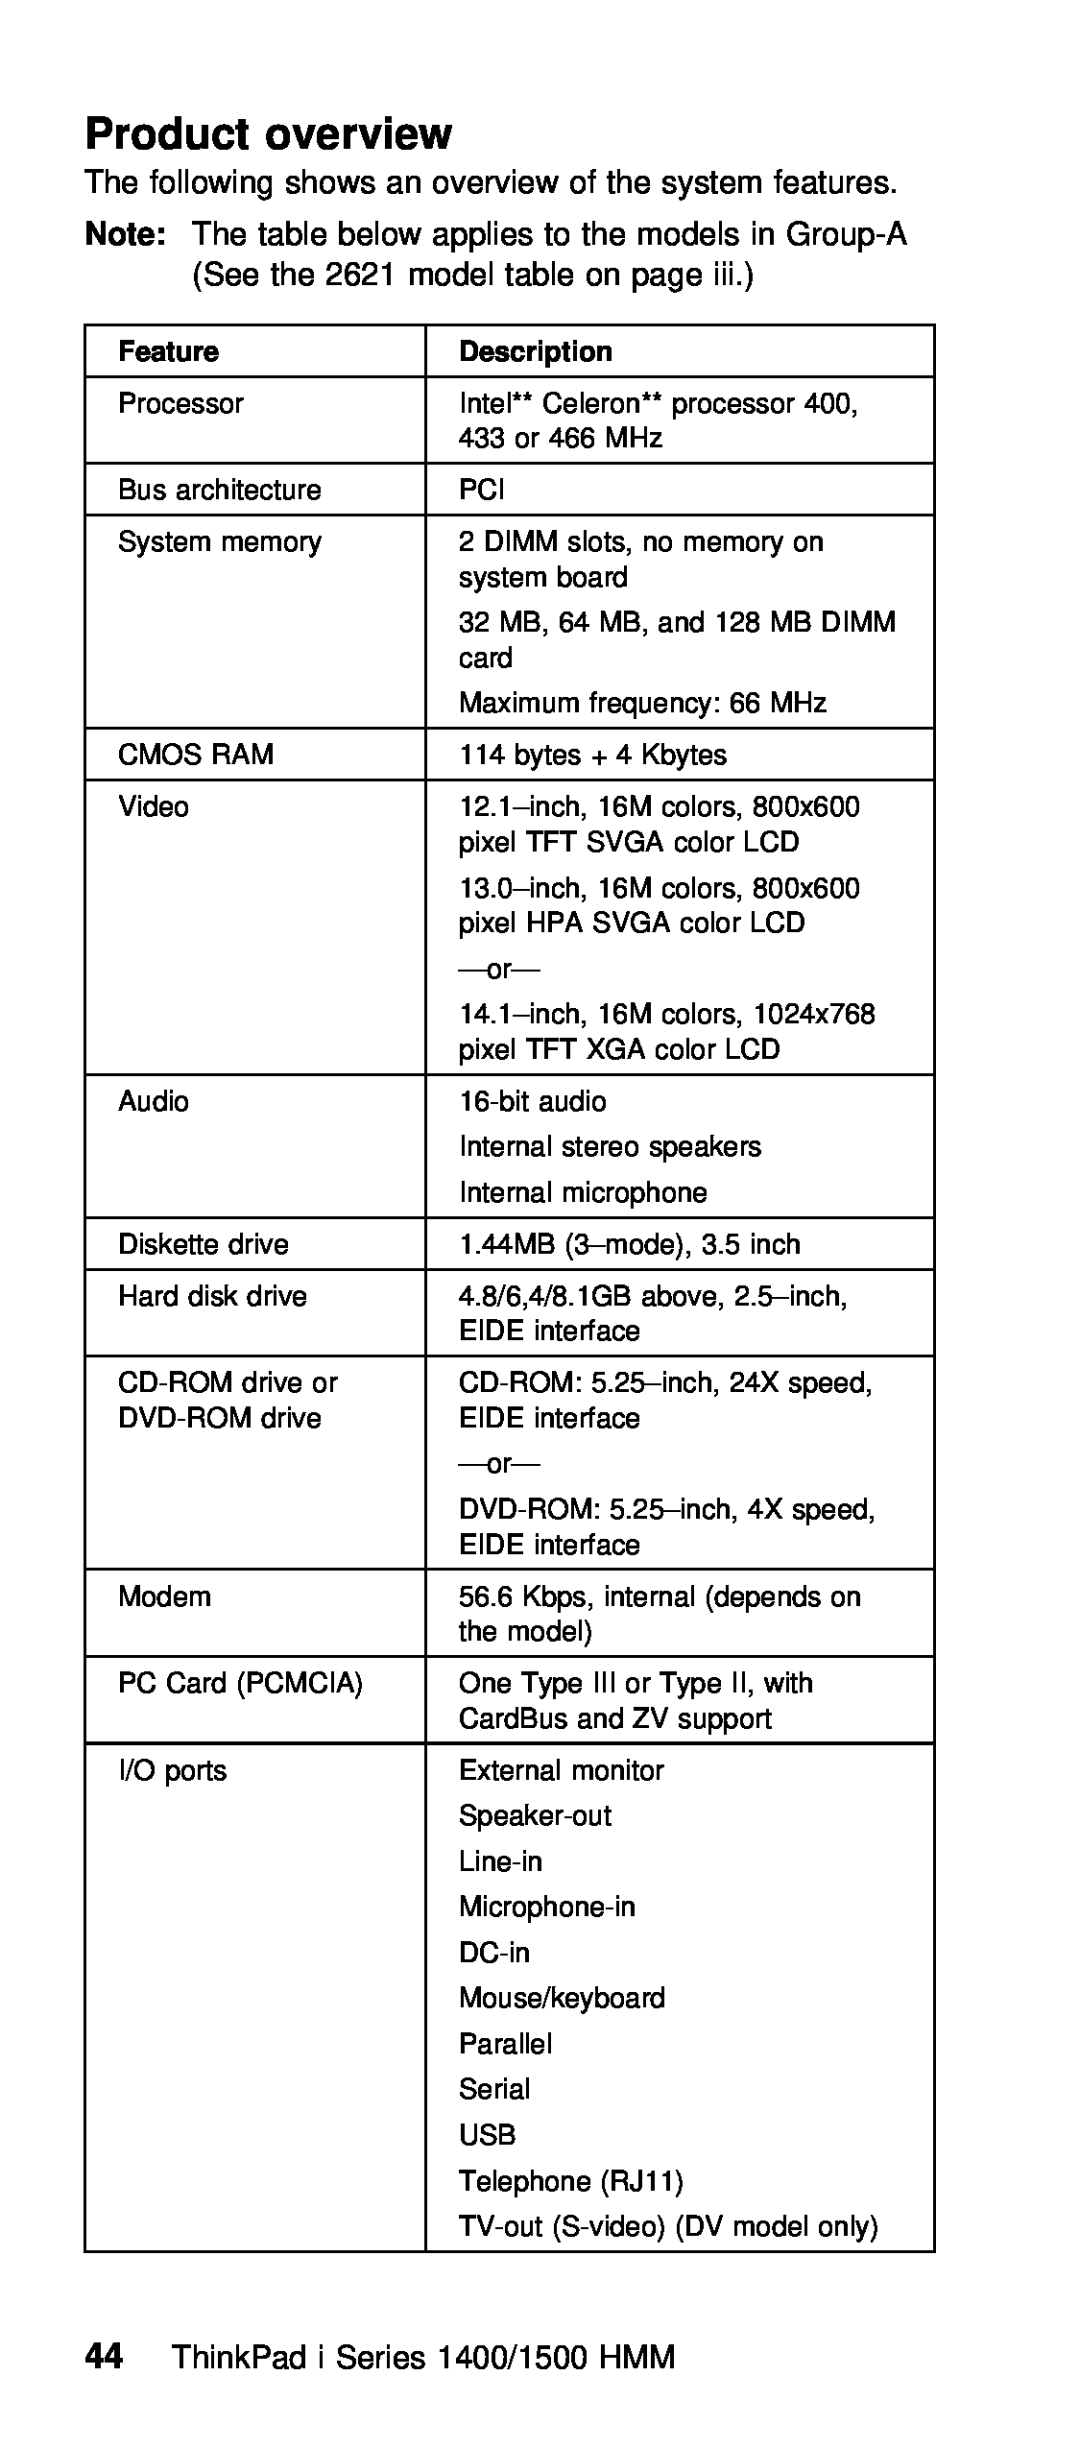 IBM Series 1500 manual Product overview, The following shows an overview of the system fea, ThinkPad i Series 1400/1500 HMM 